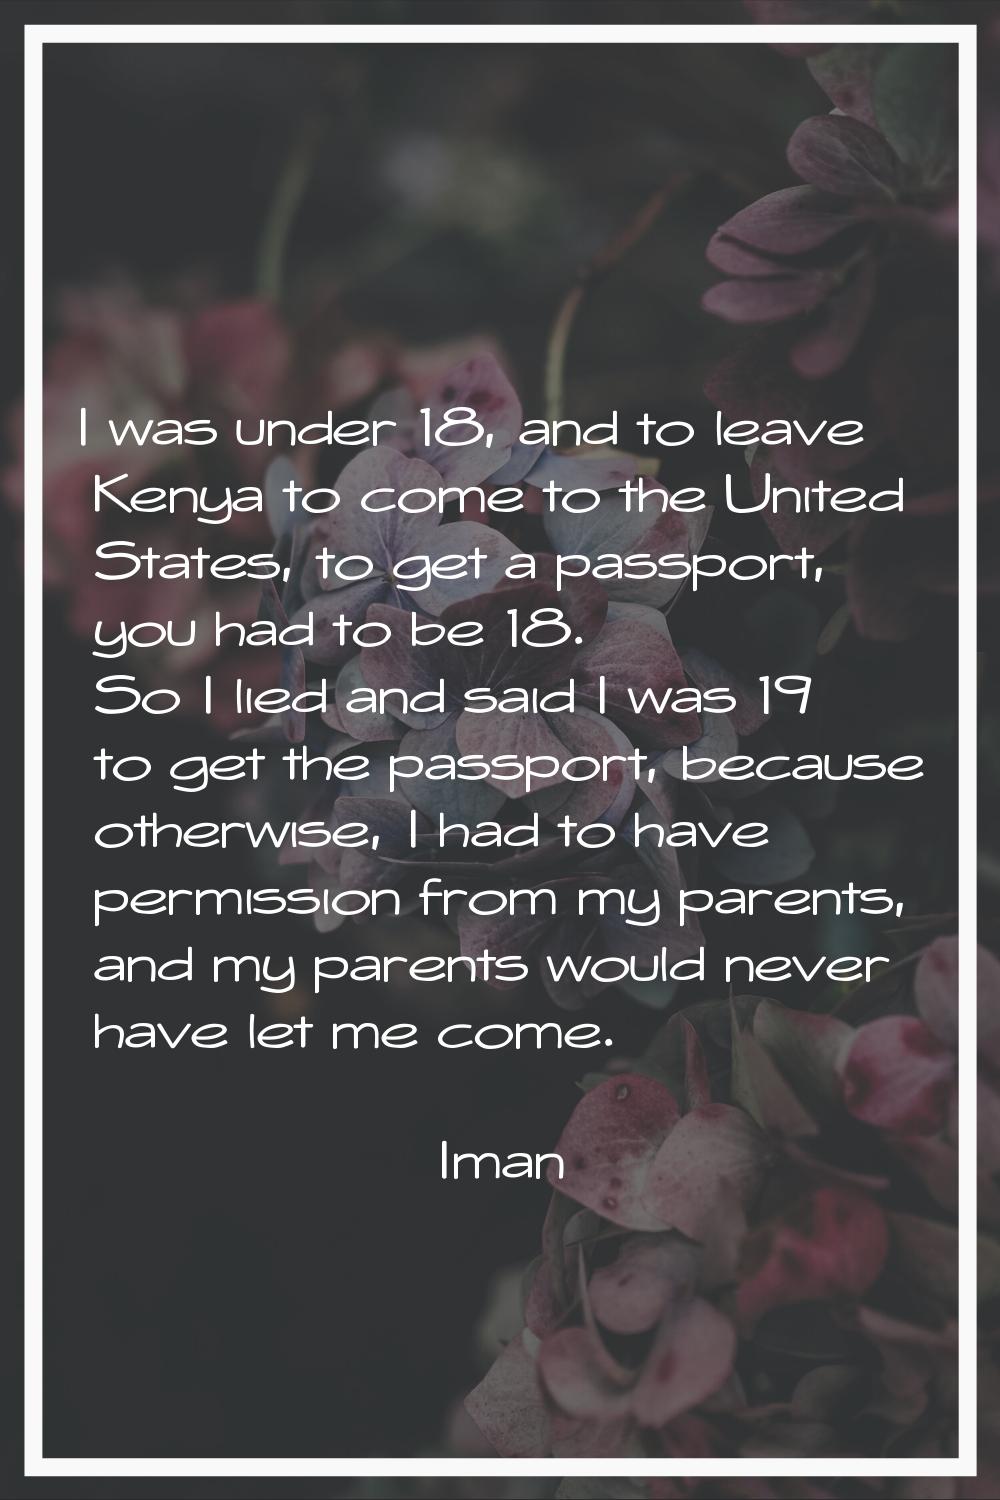 I was under 18, and to leave Kenya to come to the United States, to get a passport, you had to be 1